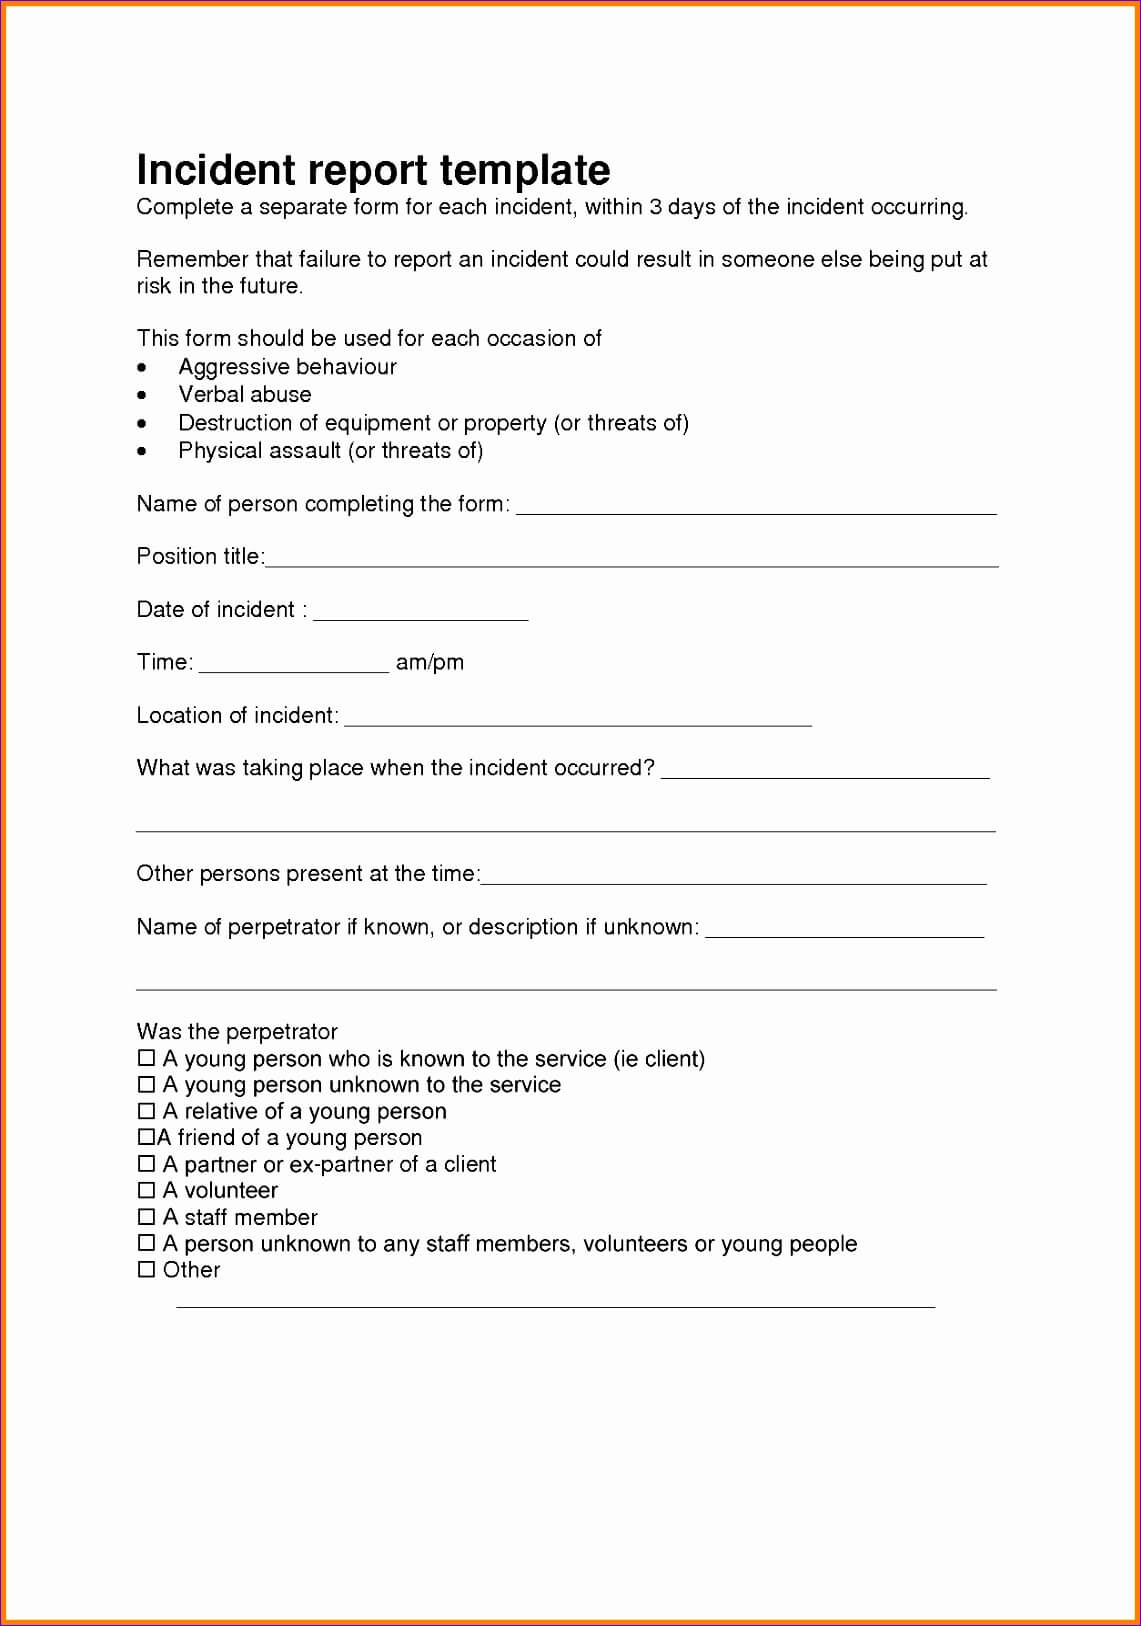 Free Incident Report Template – Fiveoutsiders In Ohs Incident Report Template Free